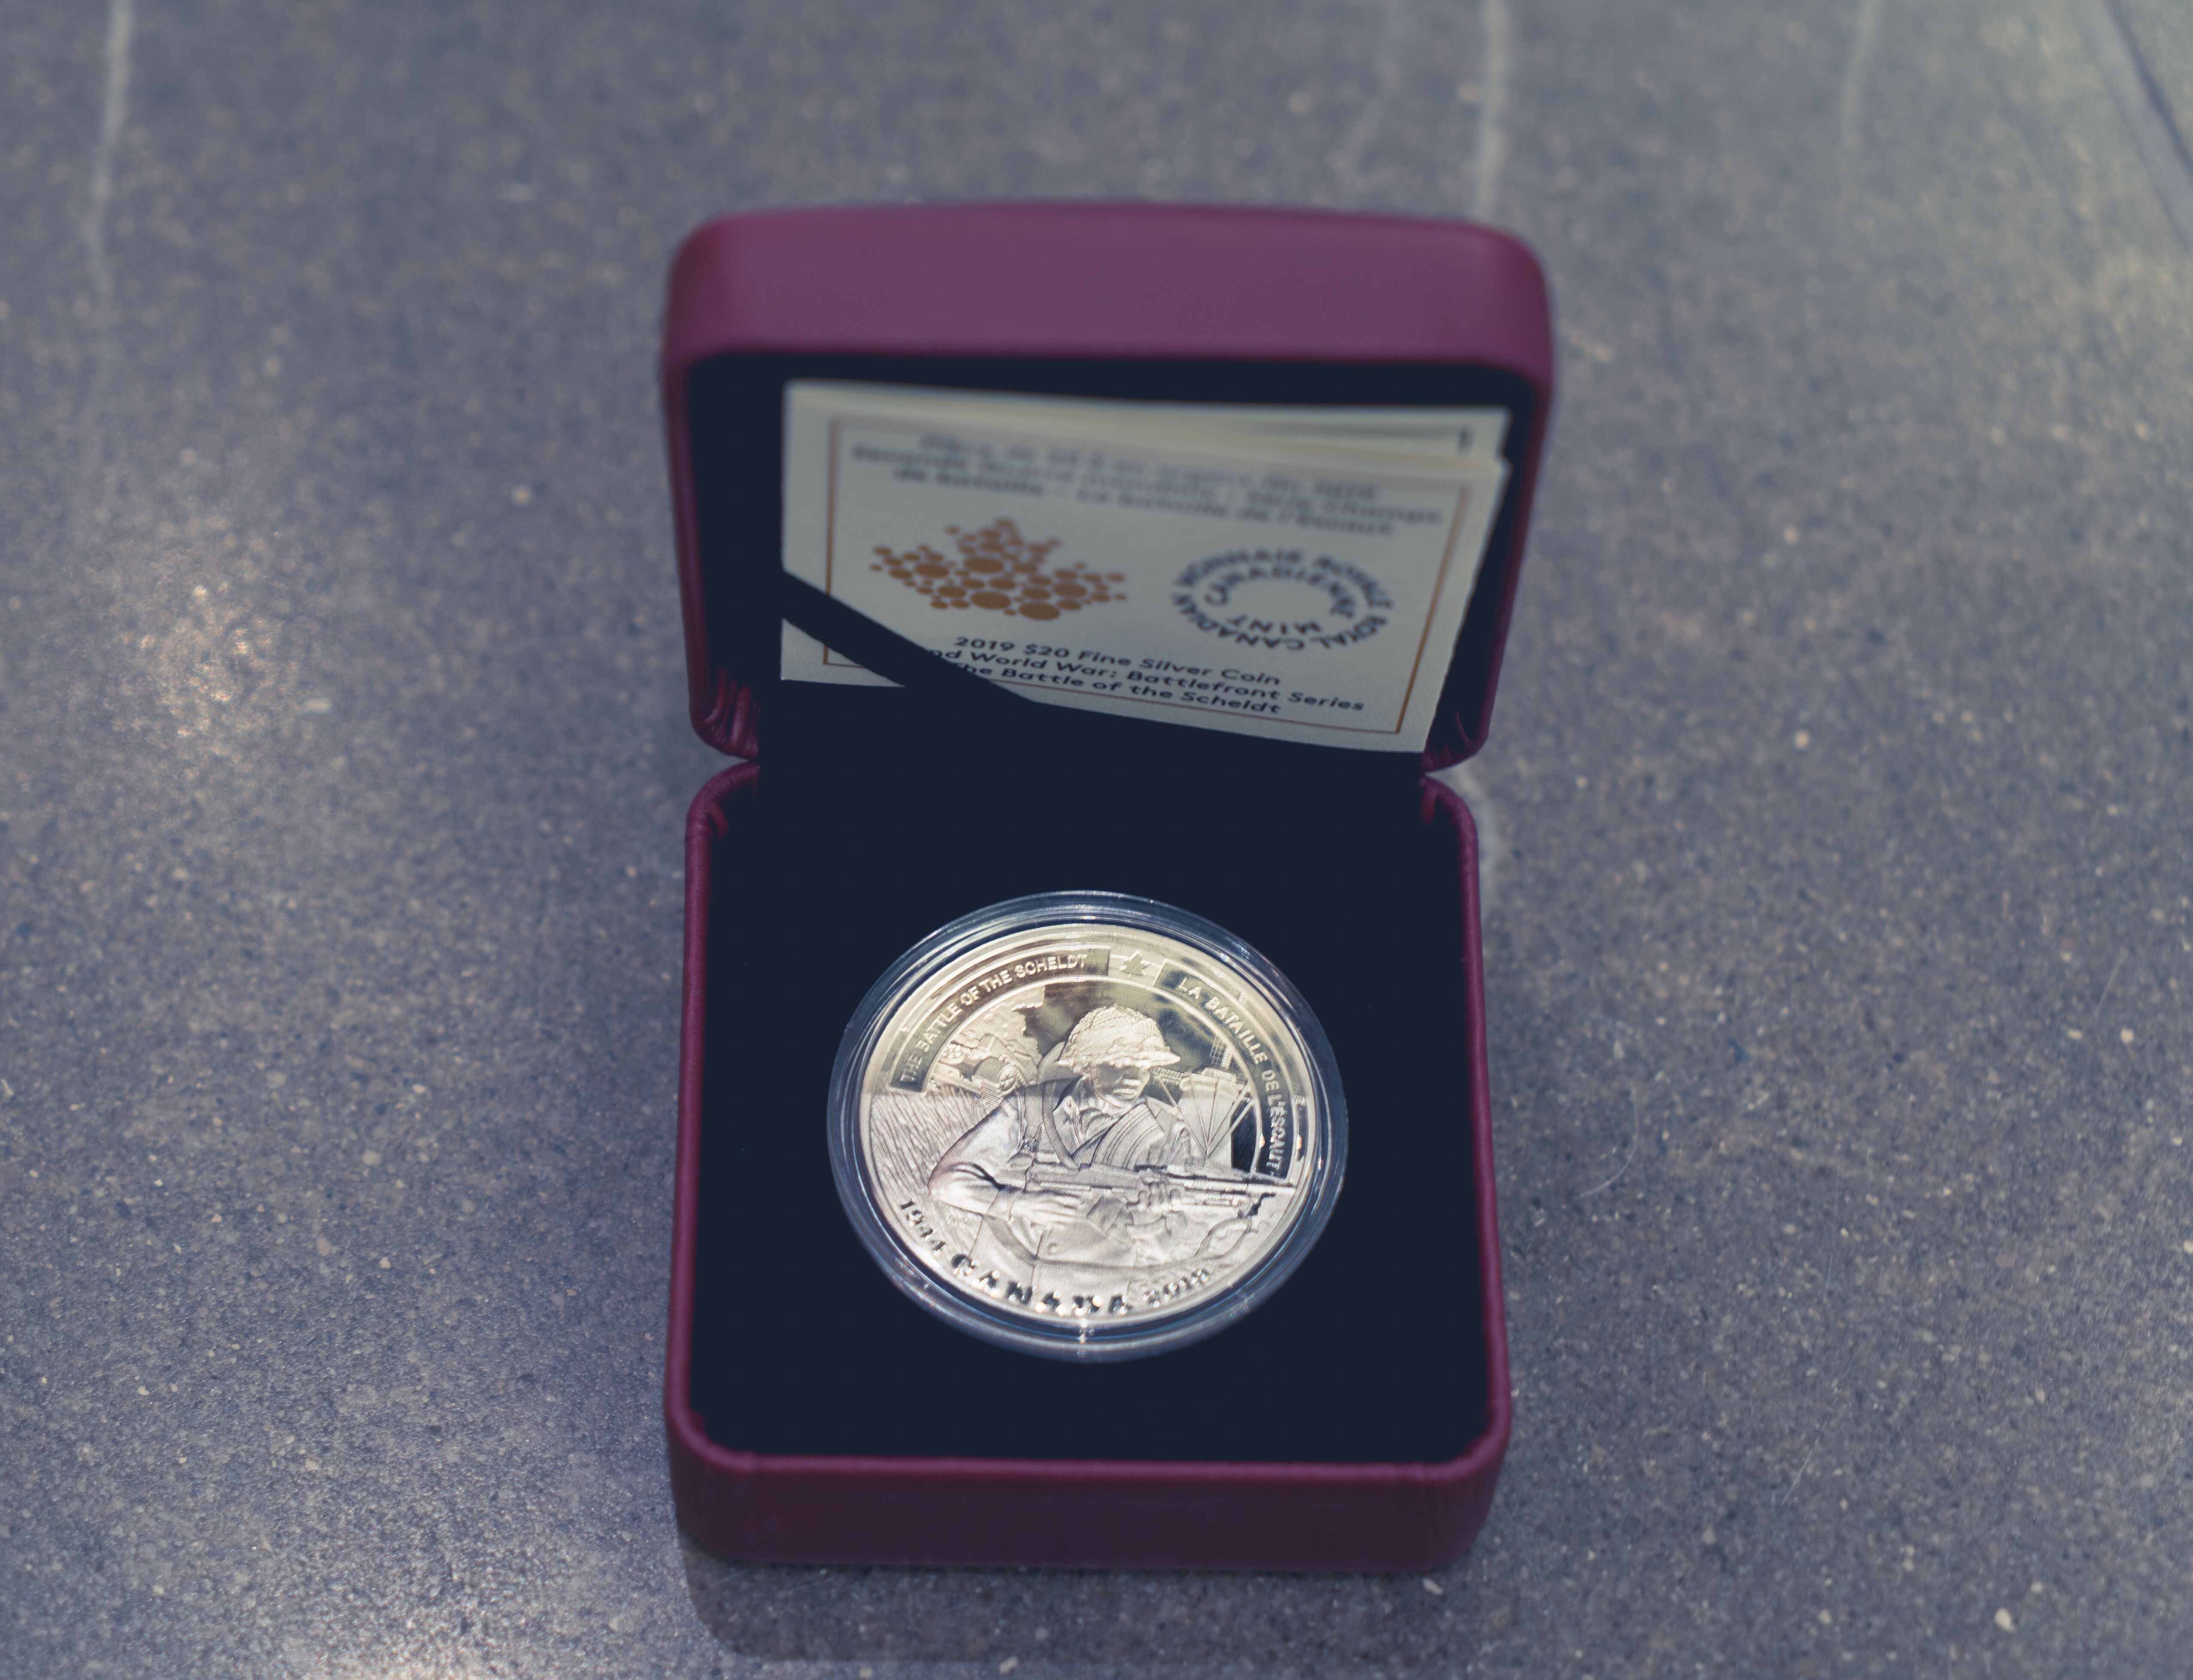 The Royal Canadian Mint’s silver 20 dollar coin that marks the 75th anniversary of the Battle of the Scheldt.